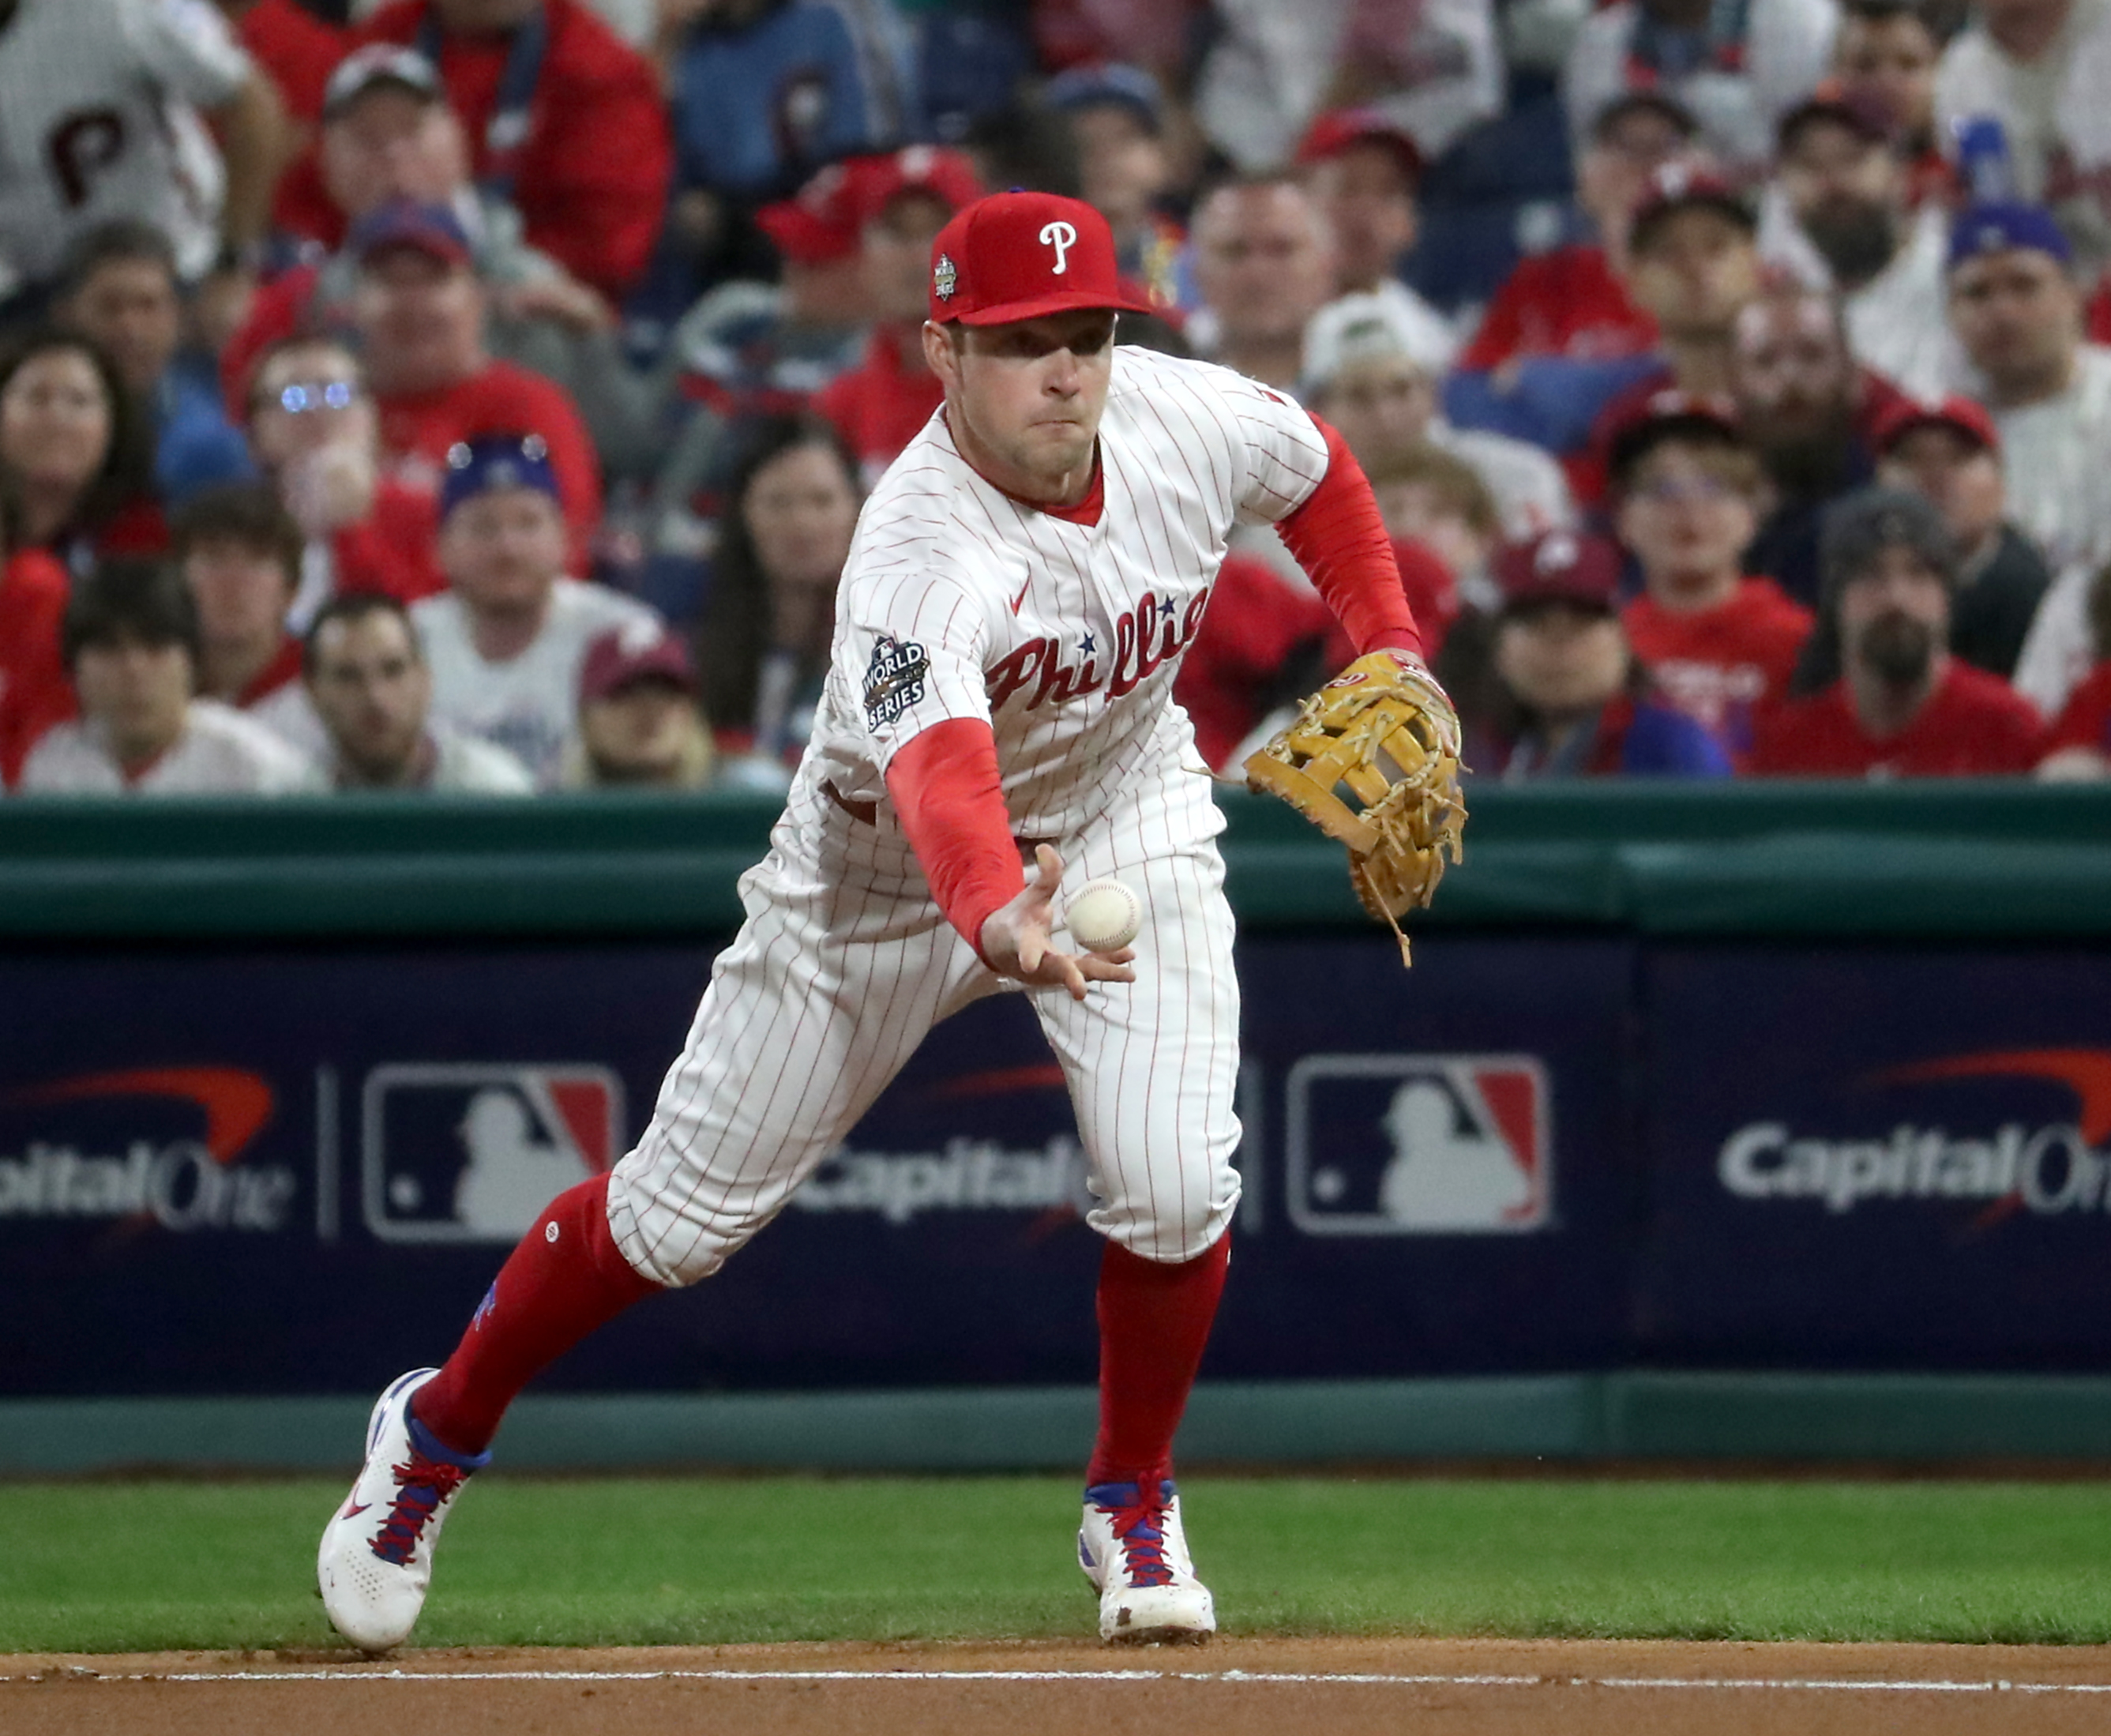 Rhys Hoskins (17) of the Philadelphia Phillies fields the ball and tosses it to Ranger Suarez (55) at first base for the out in the fourth inning during World Series Game 3 against the Houston Astros at Citizens Bank Park, Tuesday, Nov. 1, 2022.